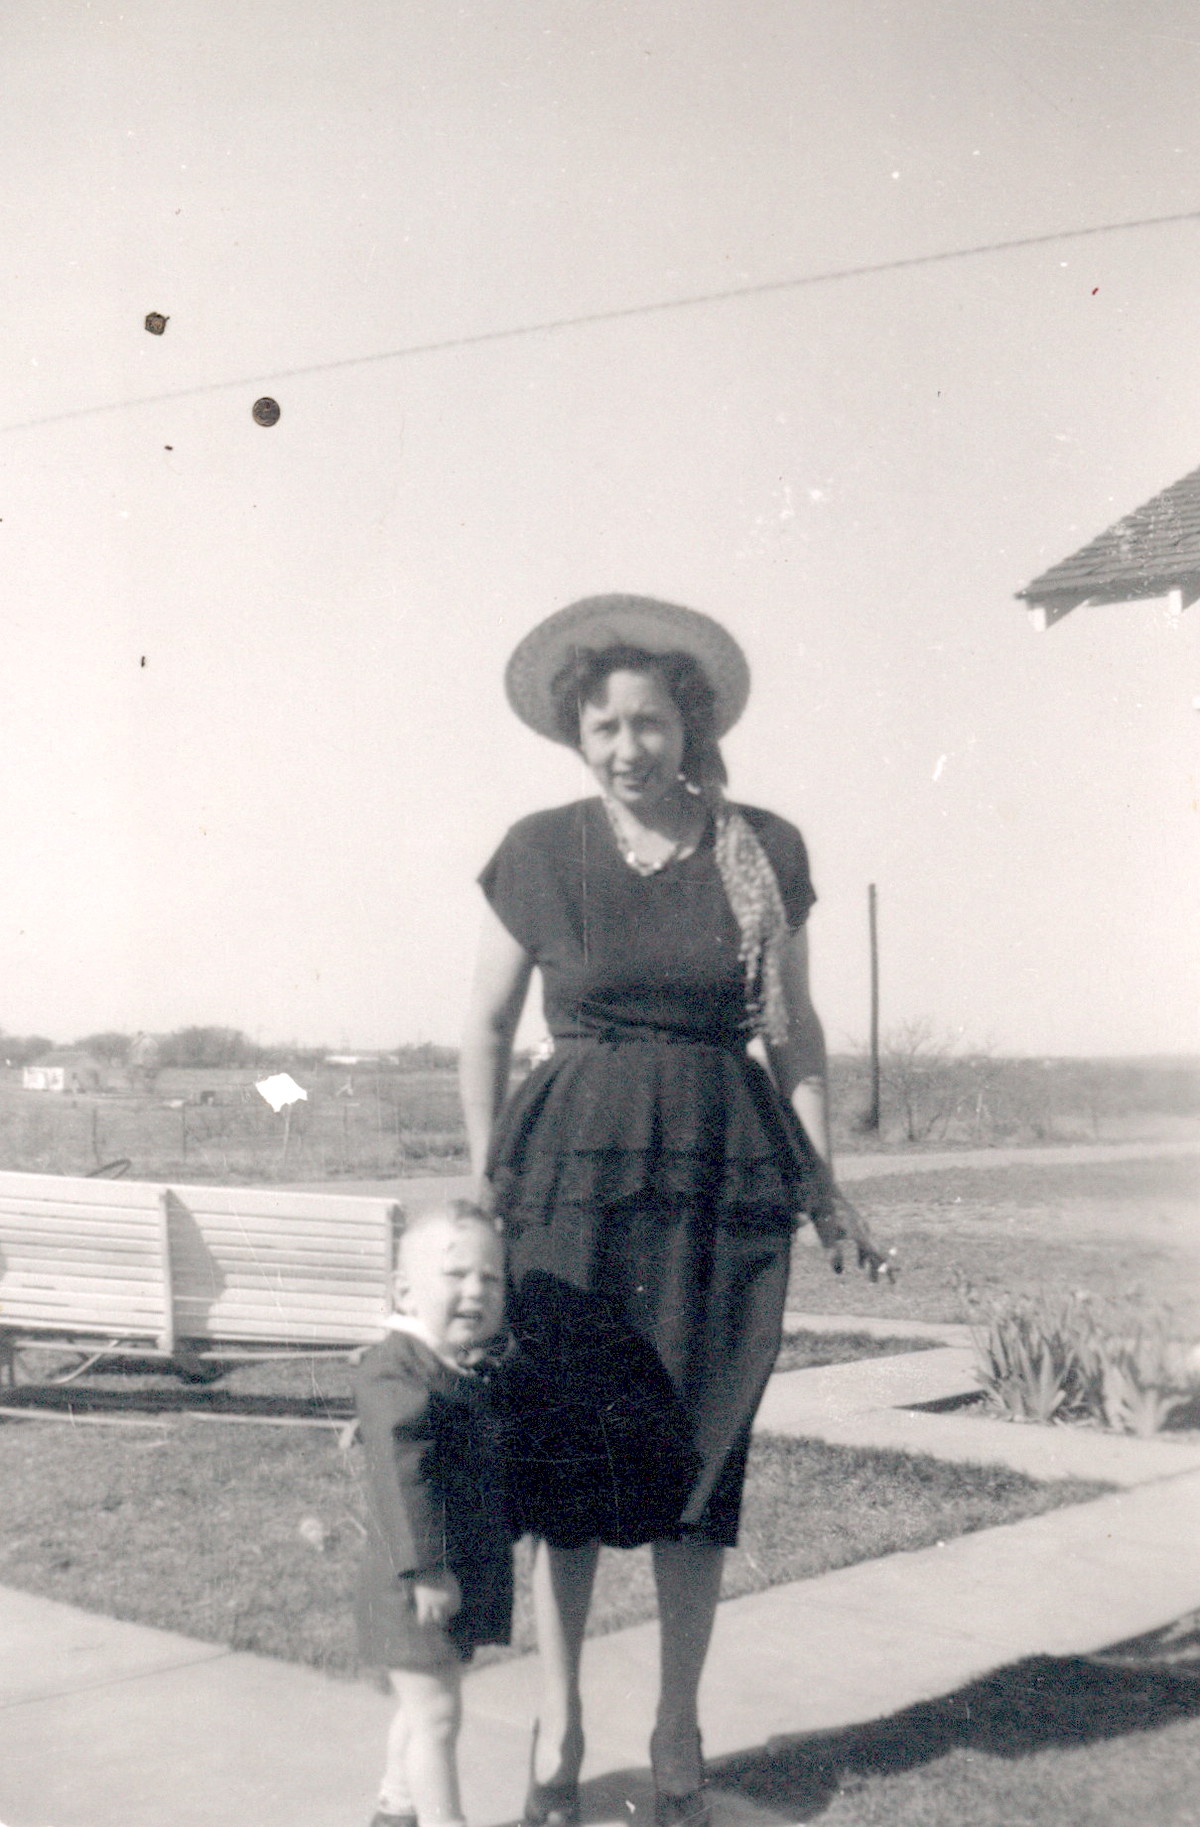 William and his mother Mildred Waybourn in Matador, TX, circa 1949. Photo courtesy of William Waybourn.